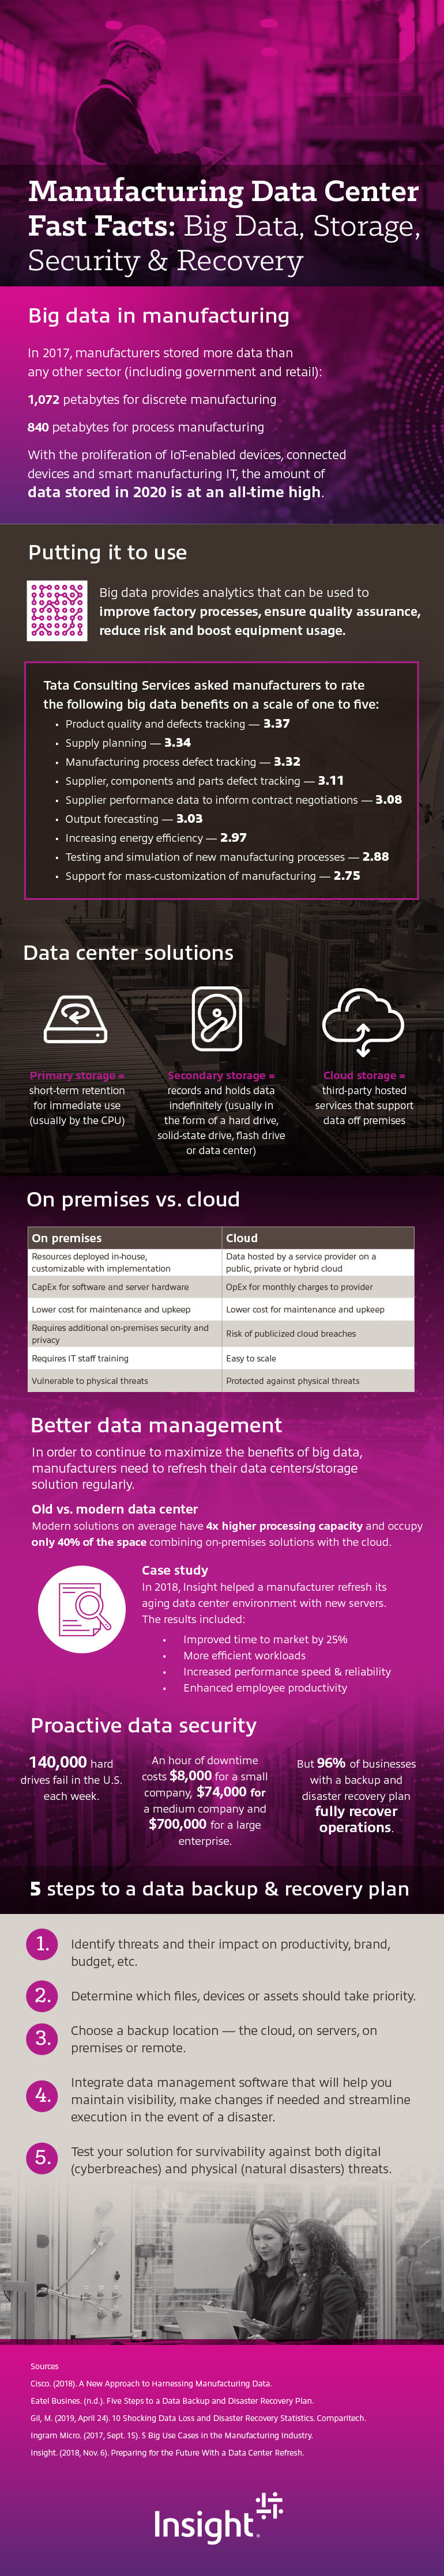 Infographic displaying the Manufacturing Data Center Fast Facts: Big Data, Storage, Security & Recovery as described below